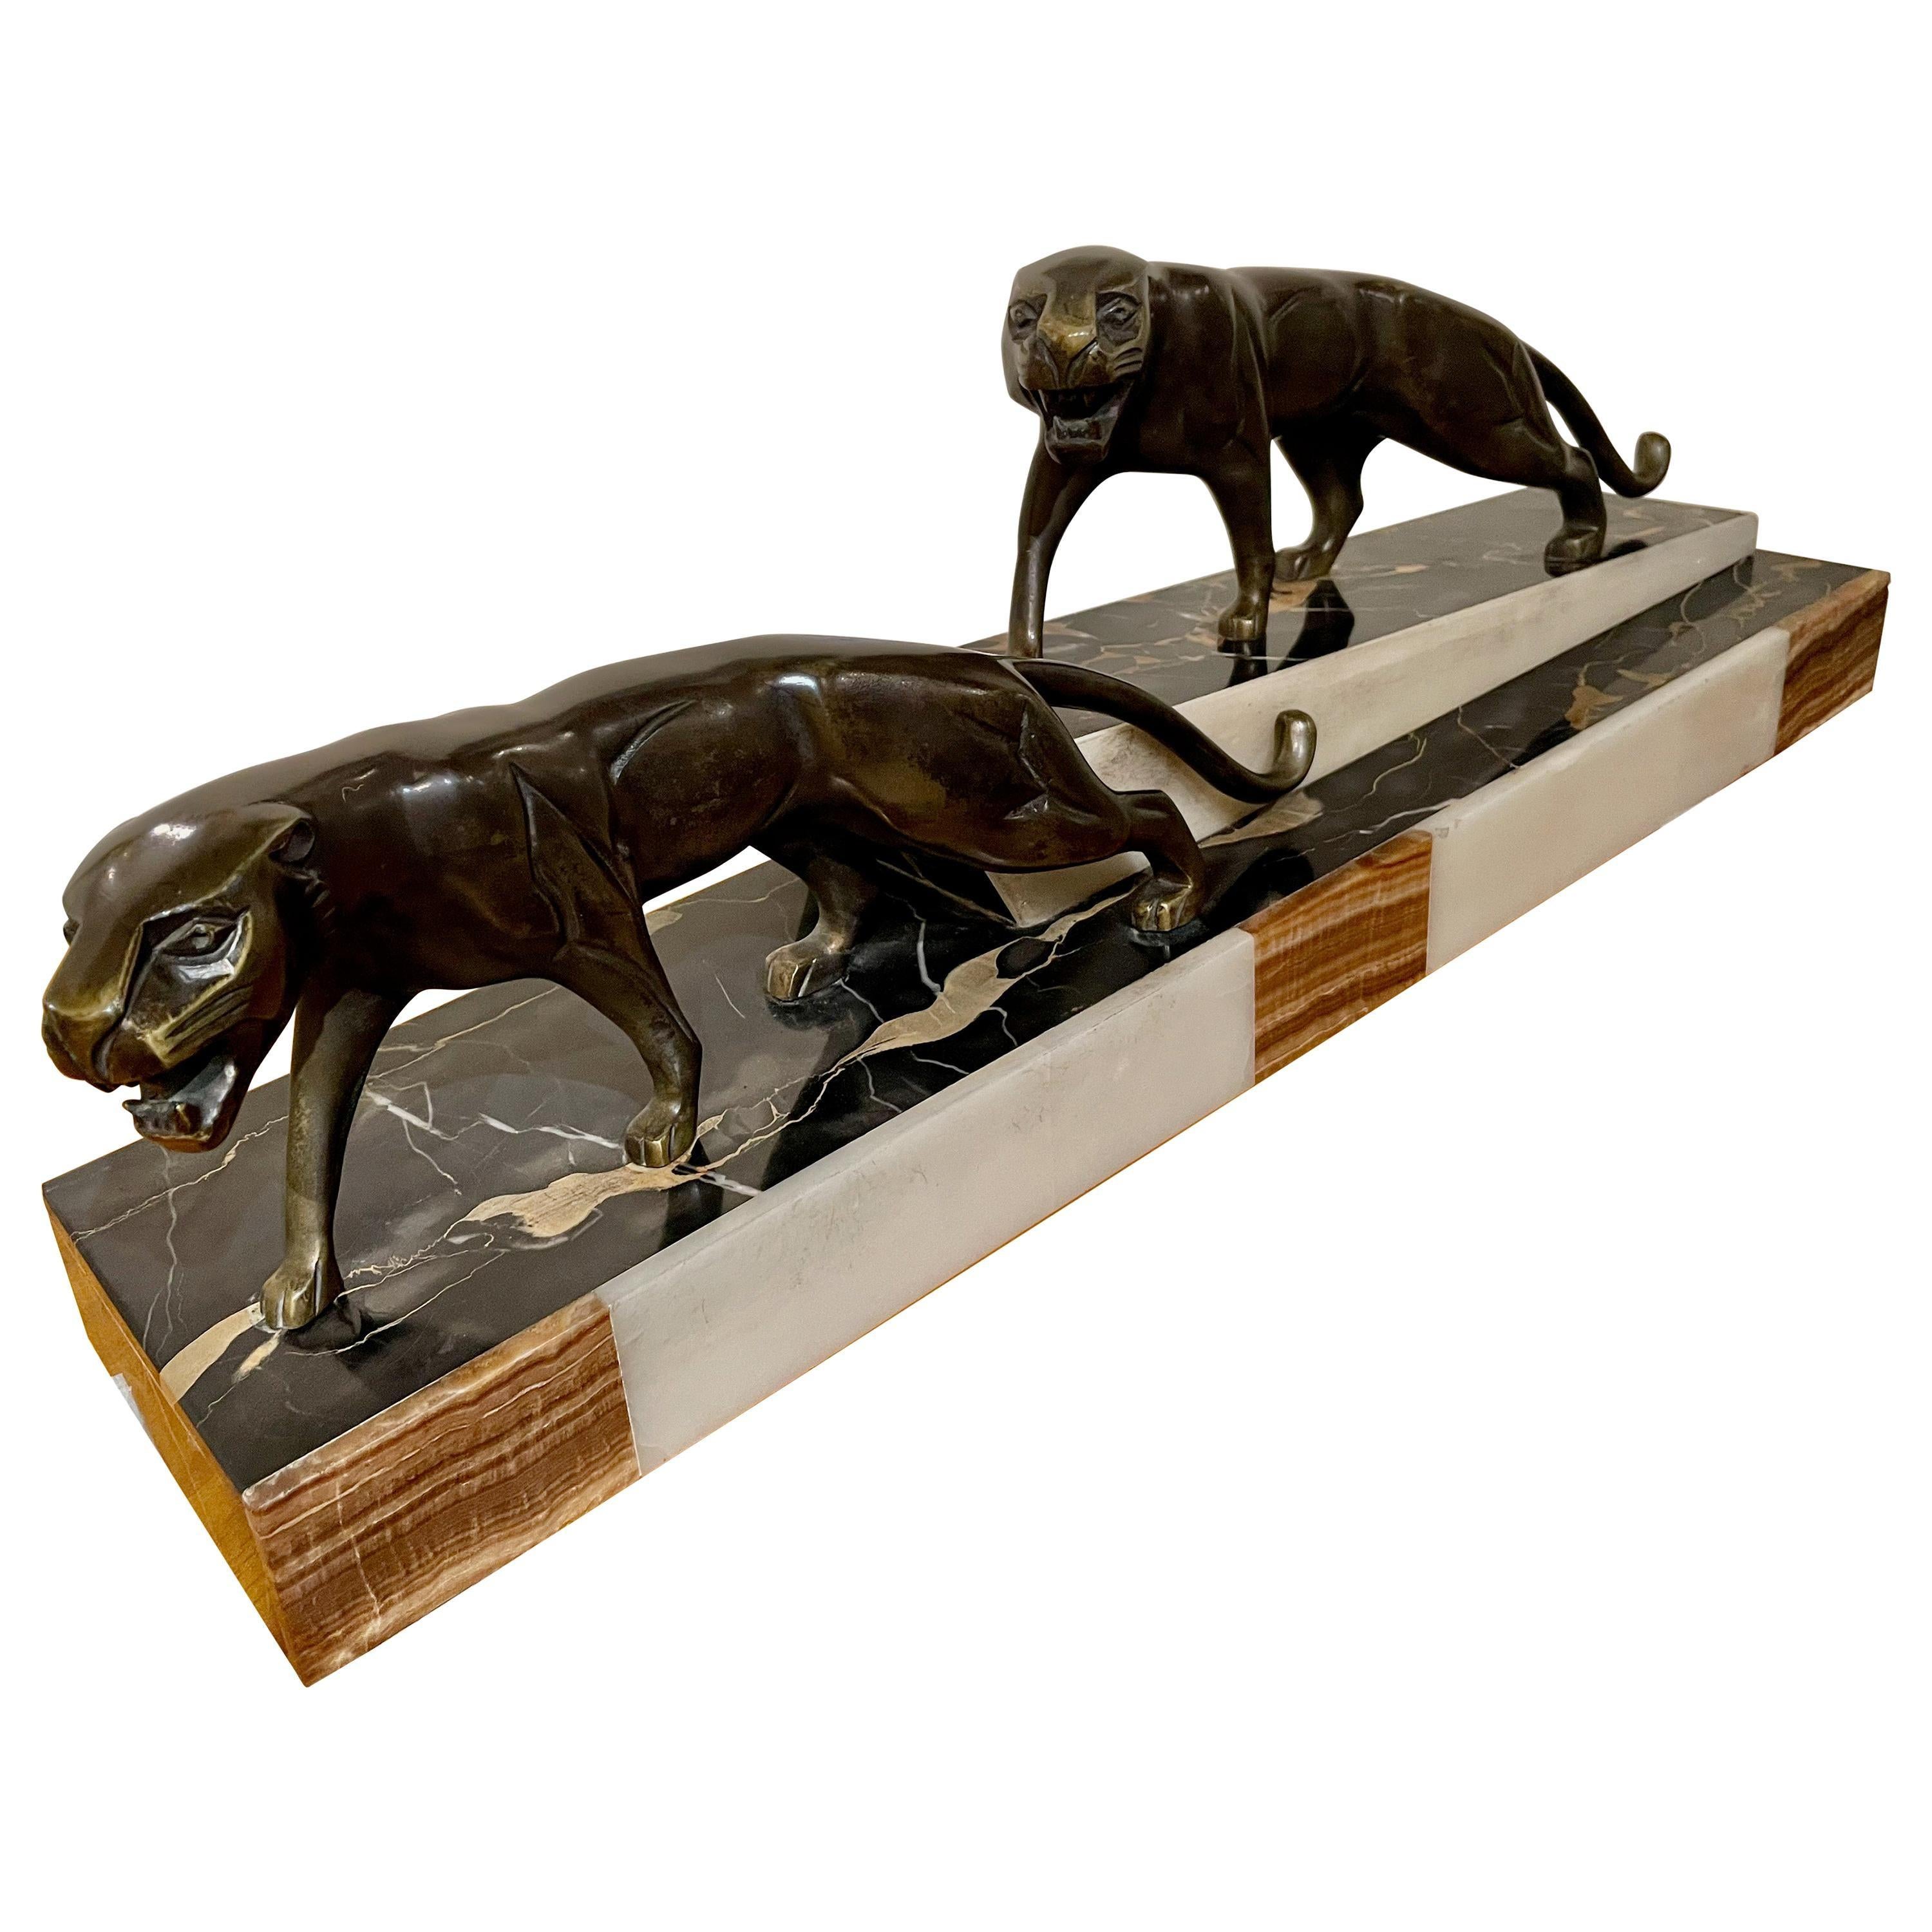 Beautiful bronze Art Deco group of two panthers by the French artist Dominique Jean Baptiste Hugues. The sculpture has a lovely patina and stands on a Portoro marble base with onyx inlay, France 1930. The artist is known for work with animals like